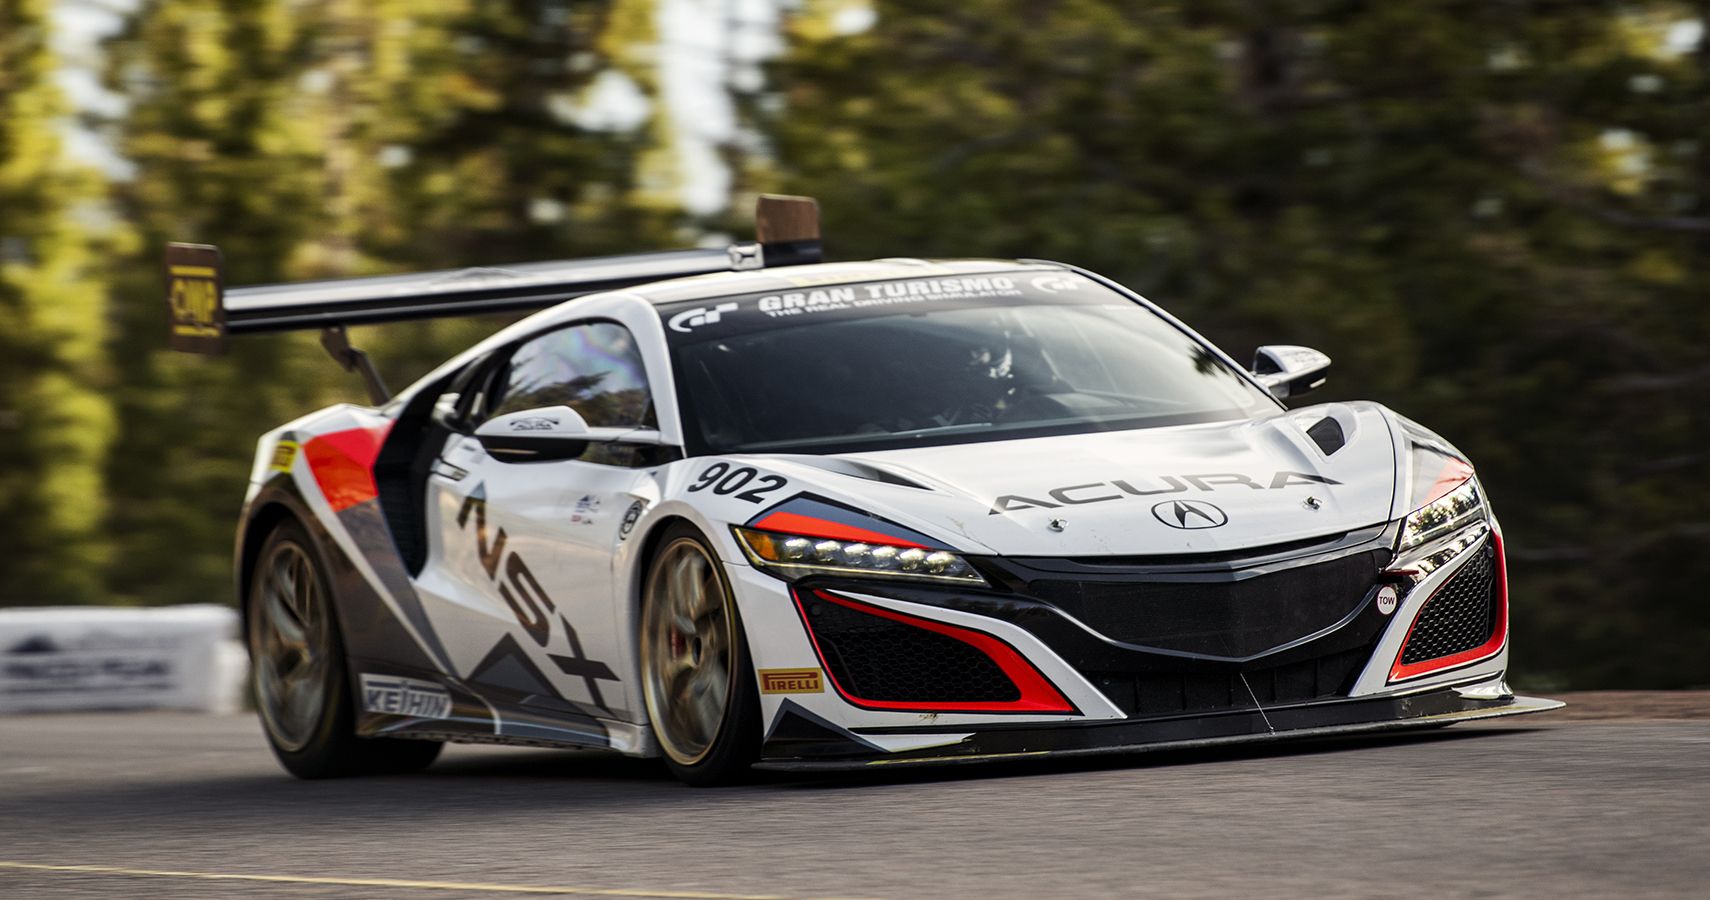 Acura Time Attack NSX Returns to Pikes Peak